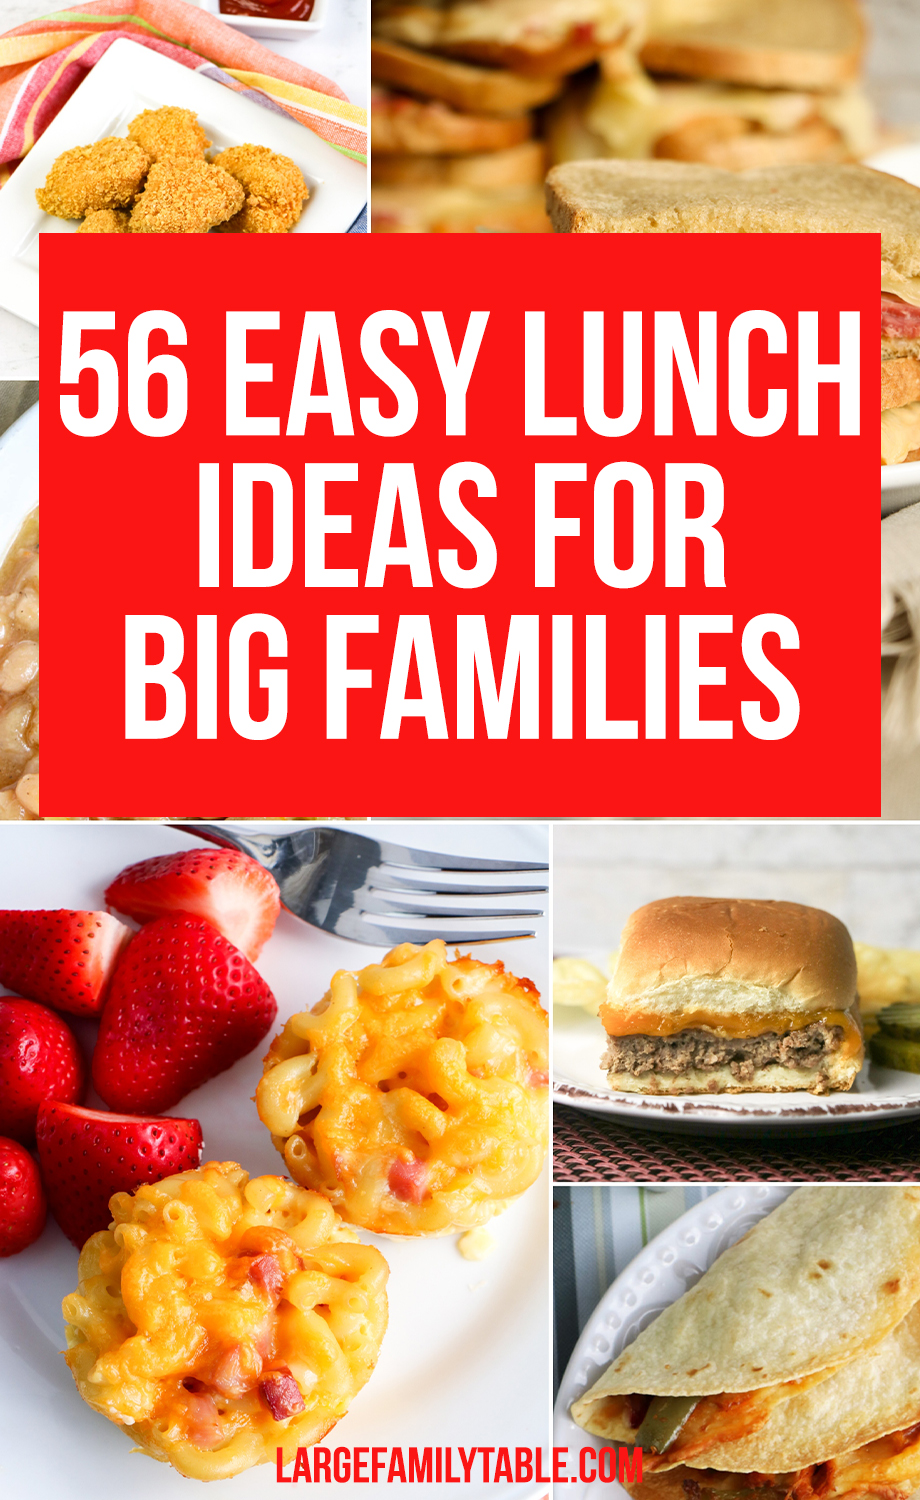 56-Easy-Lunch-Ideas-for-Big-Families